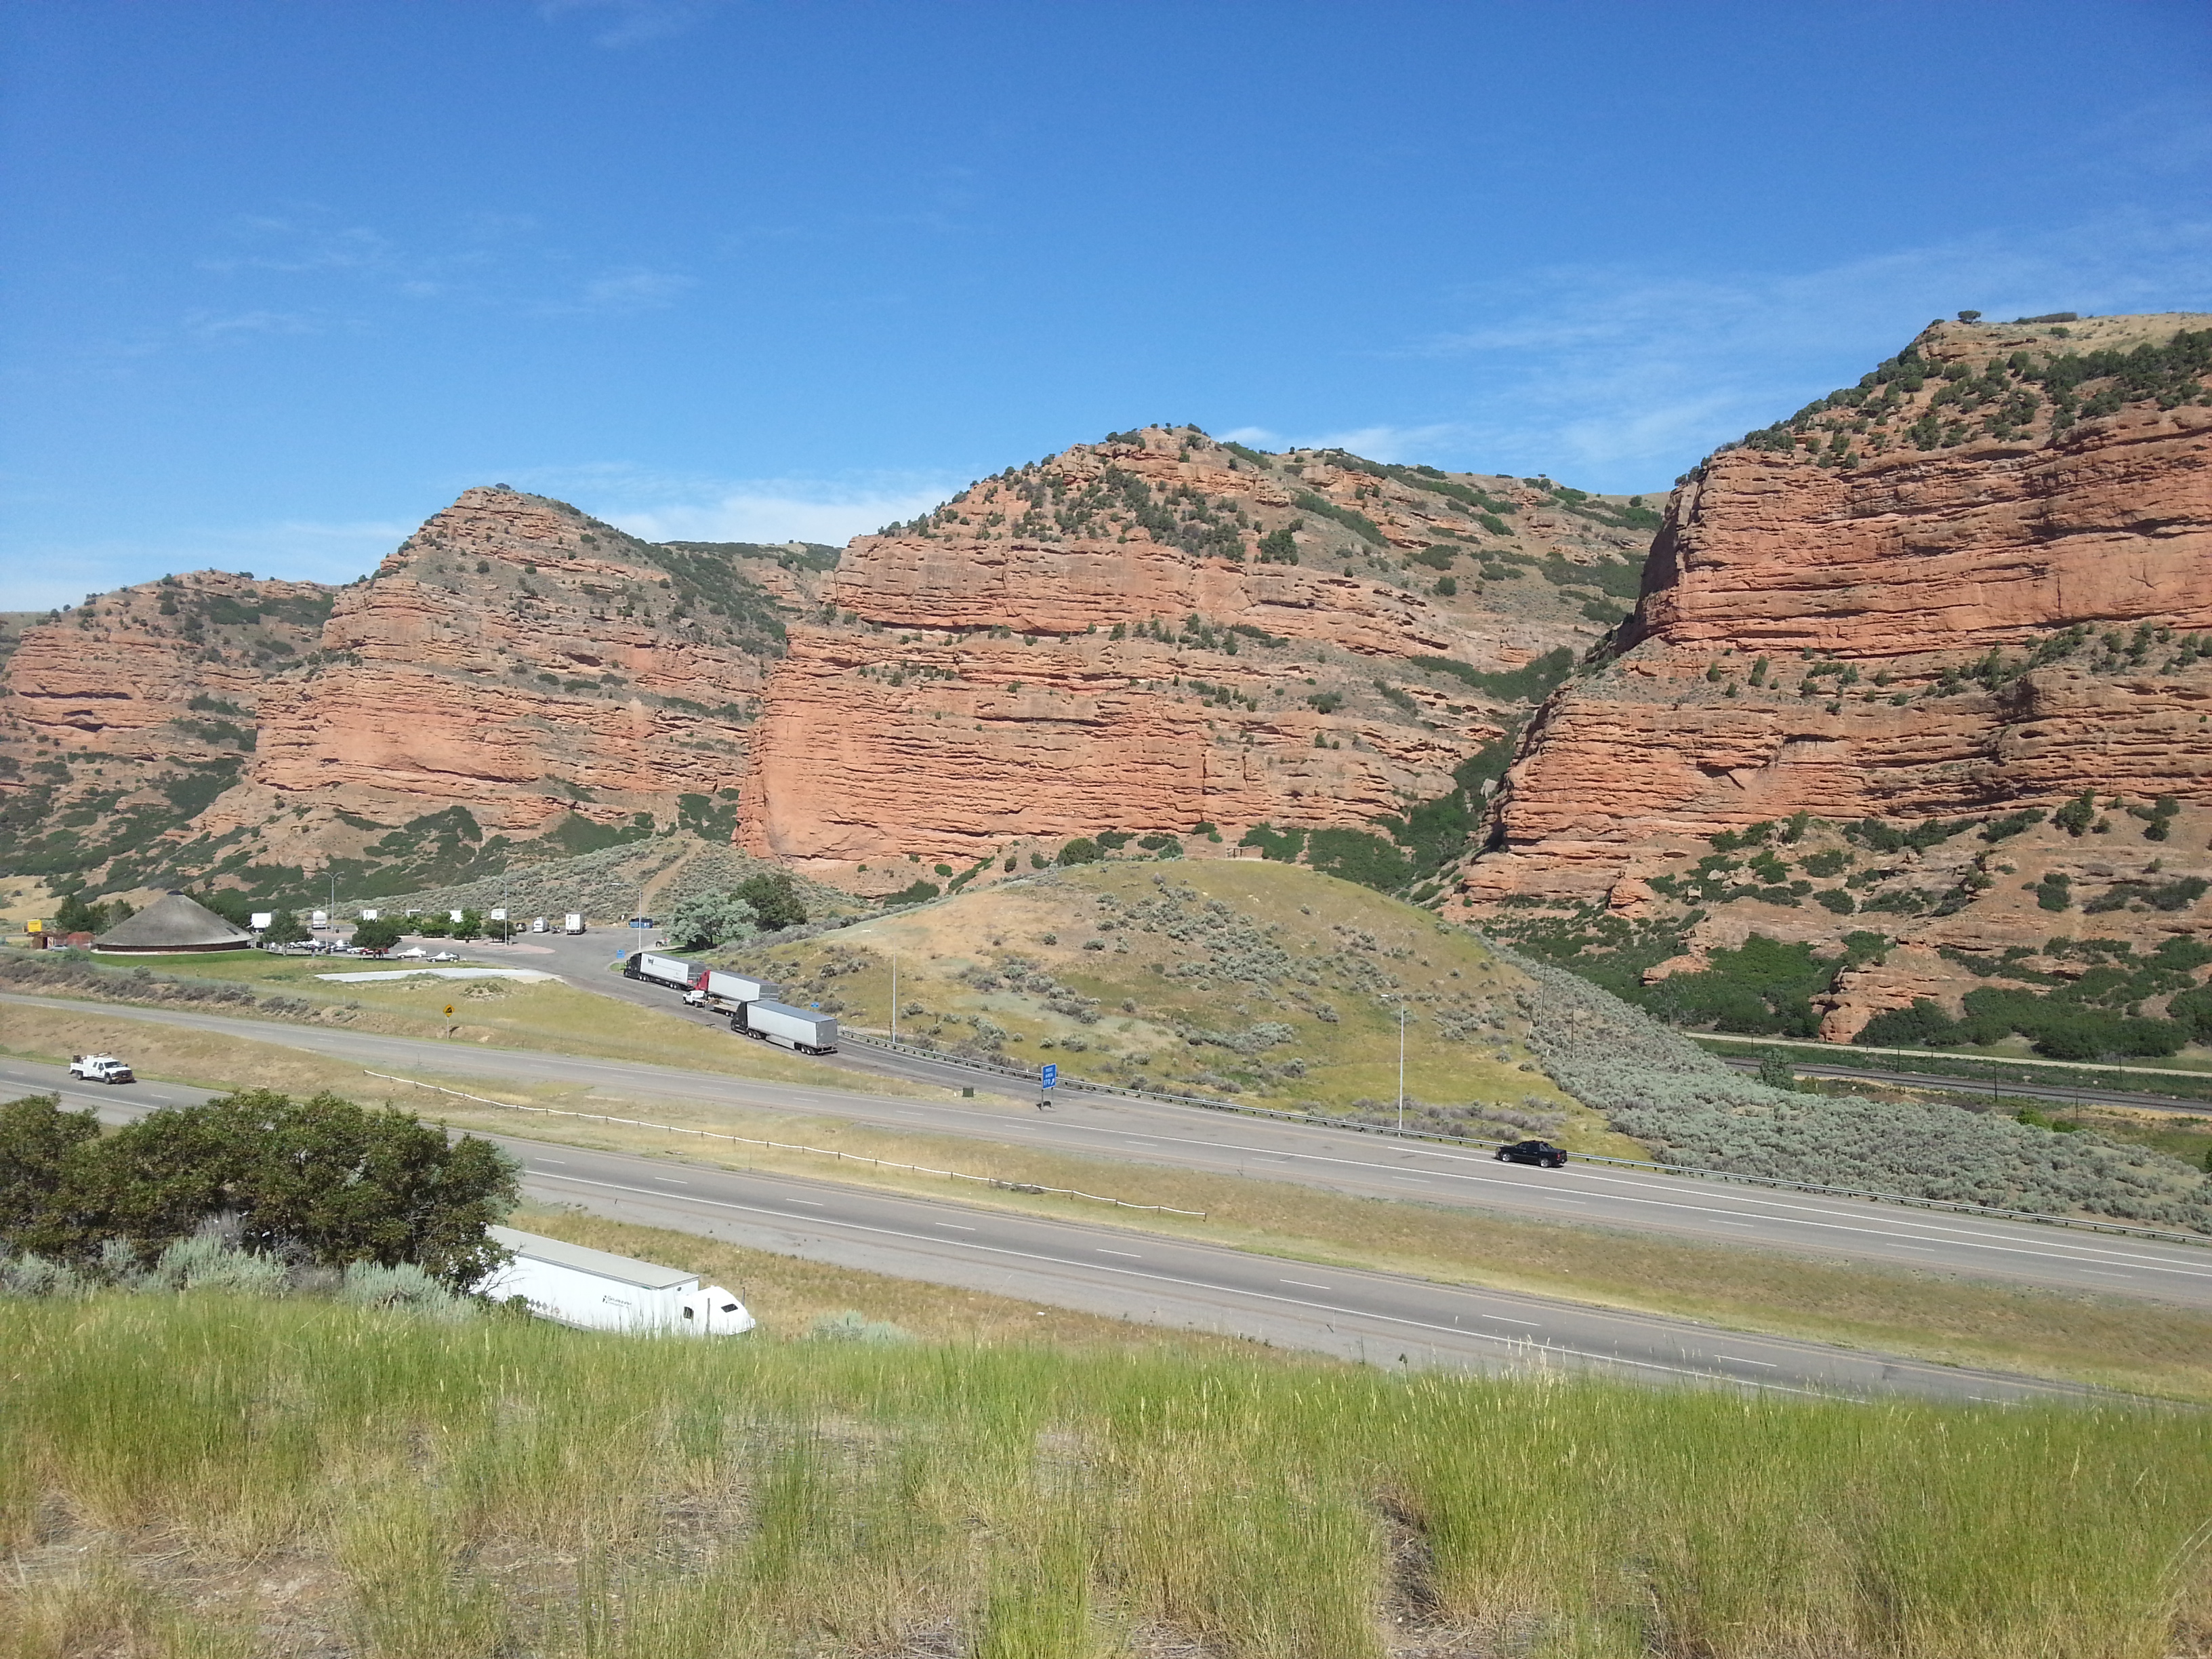 Red cliffs line a highway as seen from a high point with grass in the foreground.